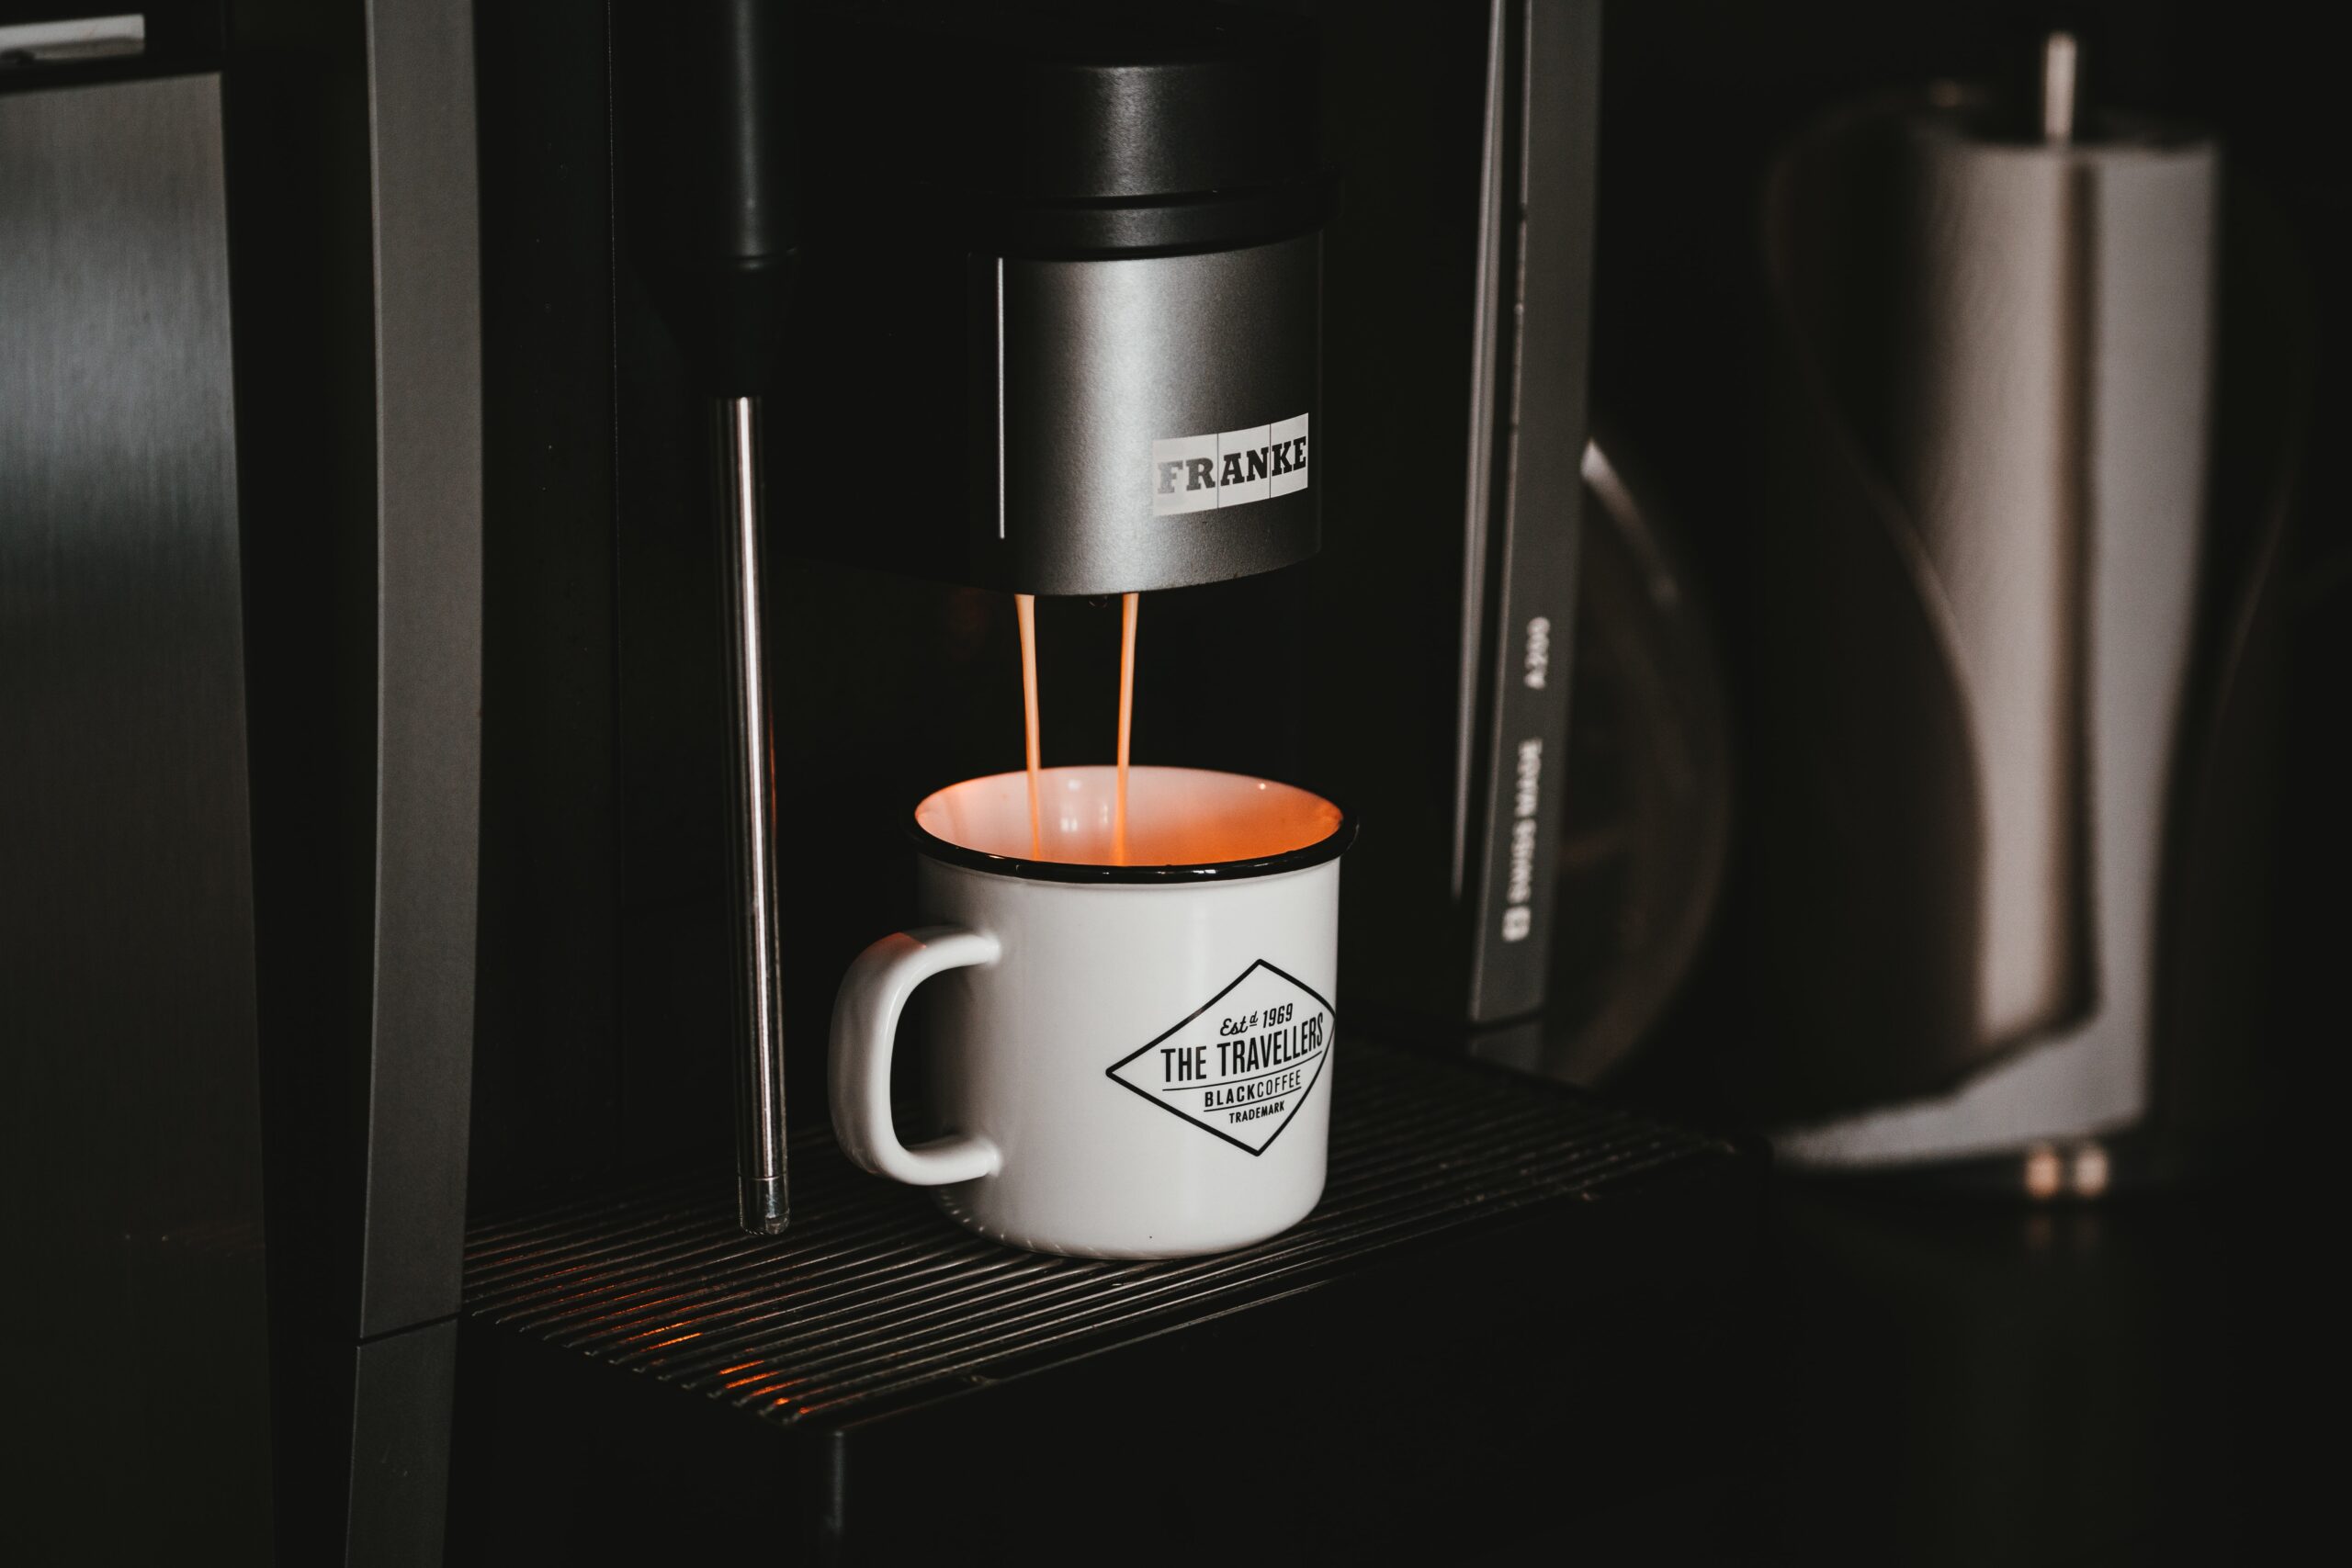 White ceramic mug on black and silver coffee maker with espresso being brewed into the cup.